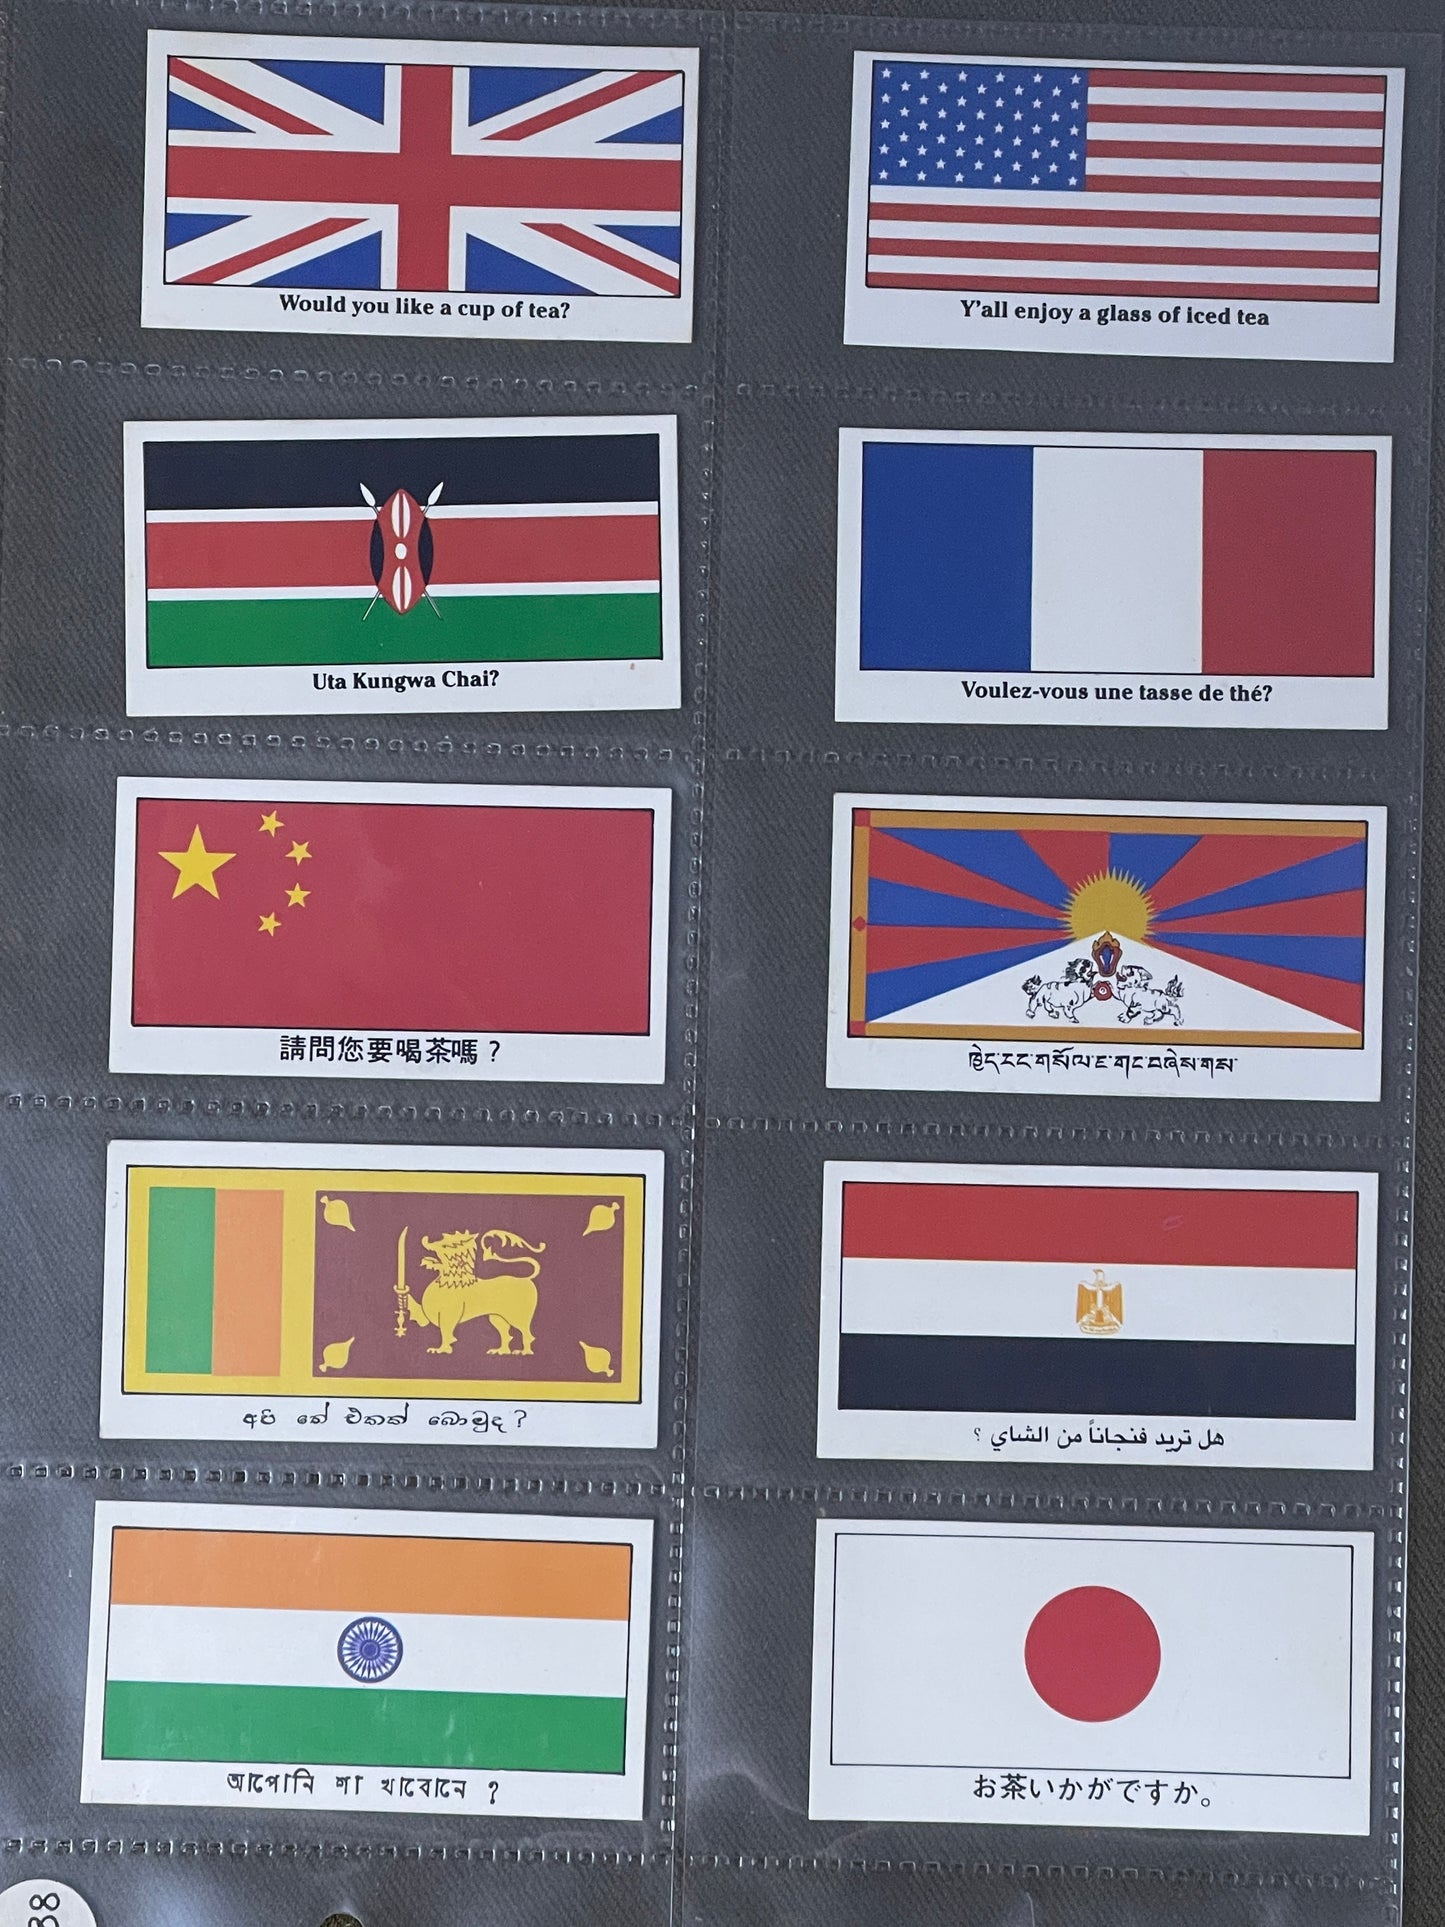 The Language of Tea Brooke Bond Collectable Cards 1988 Flags